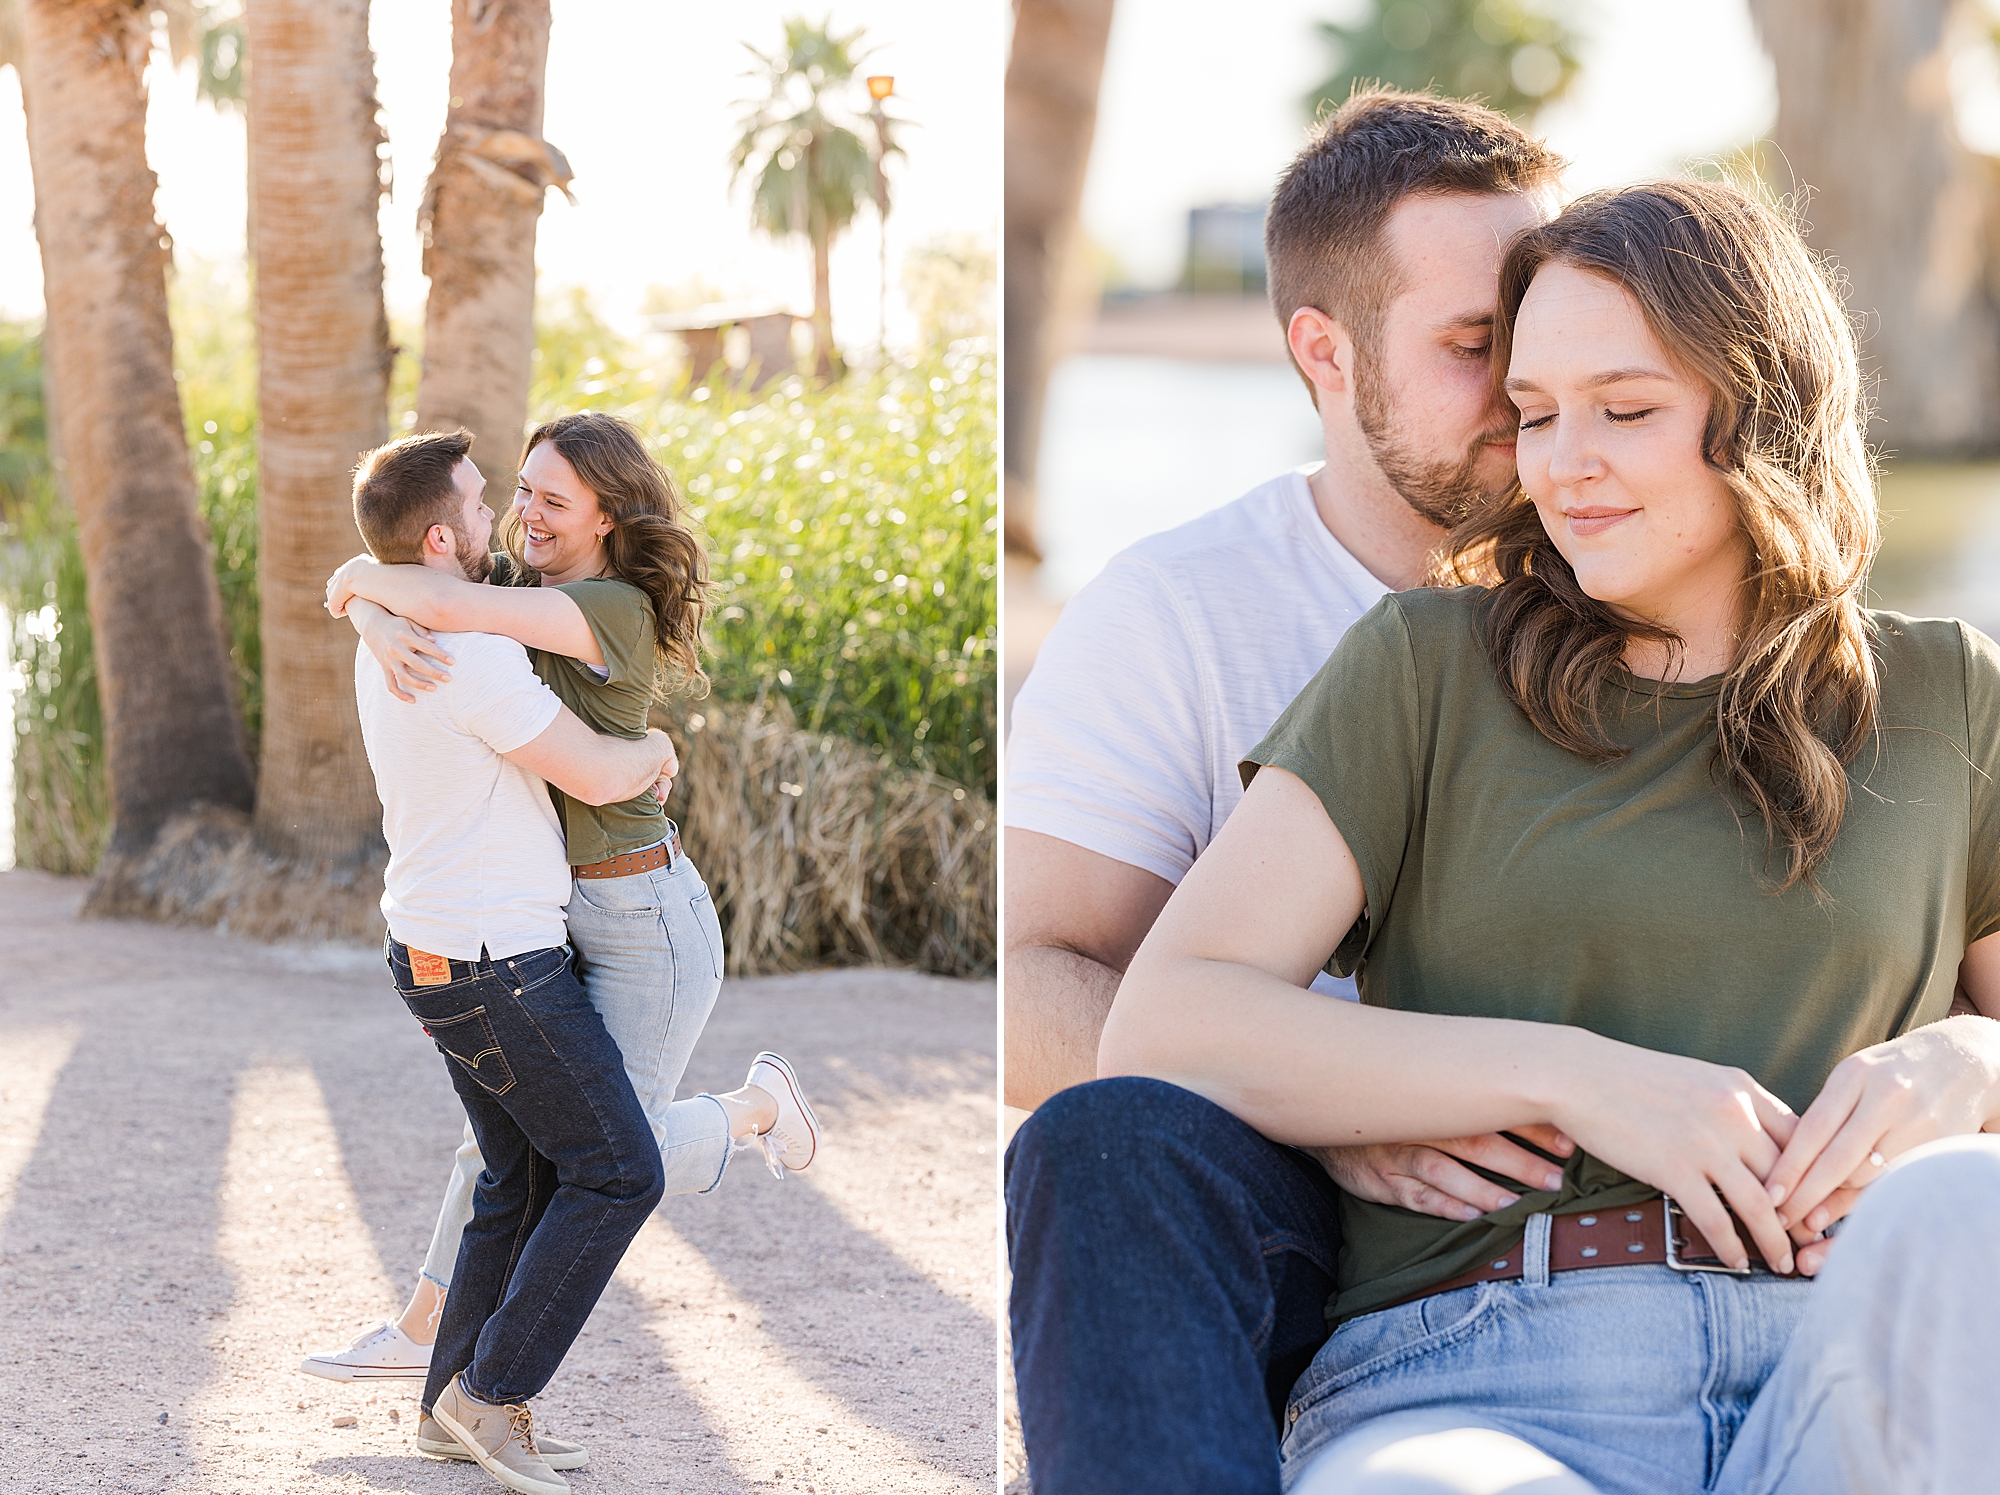 A romantic moment captured during an engagement session at Papago Park
